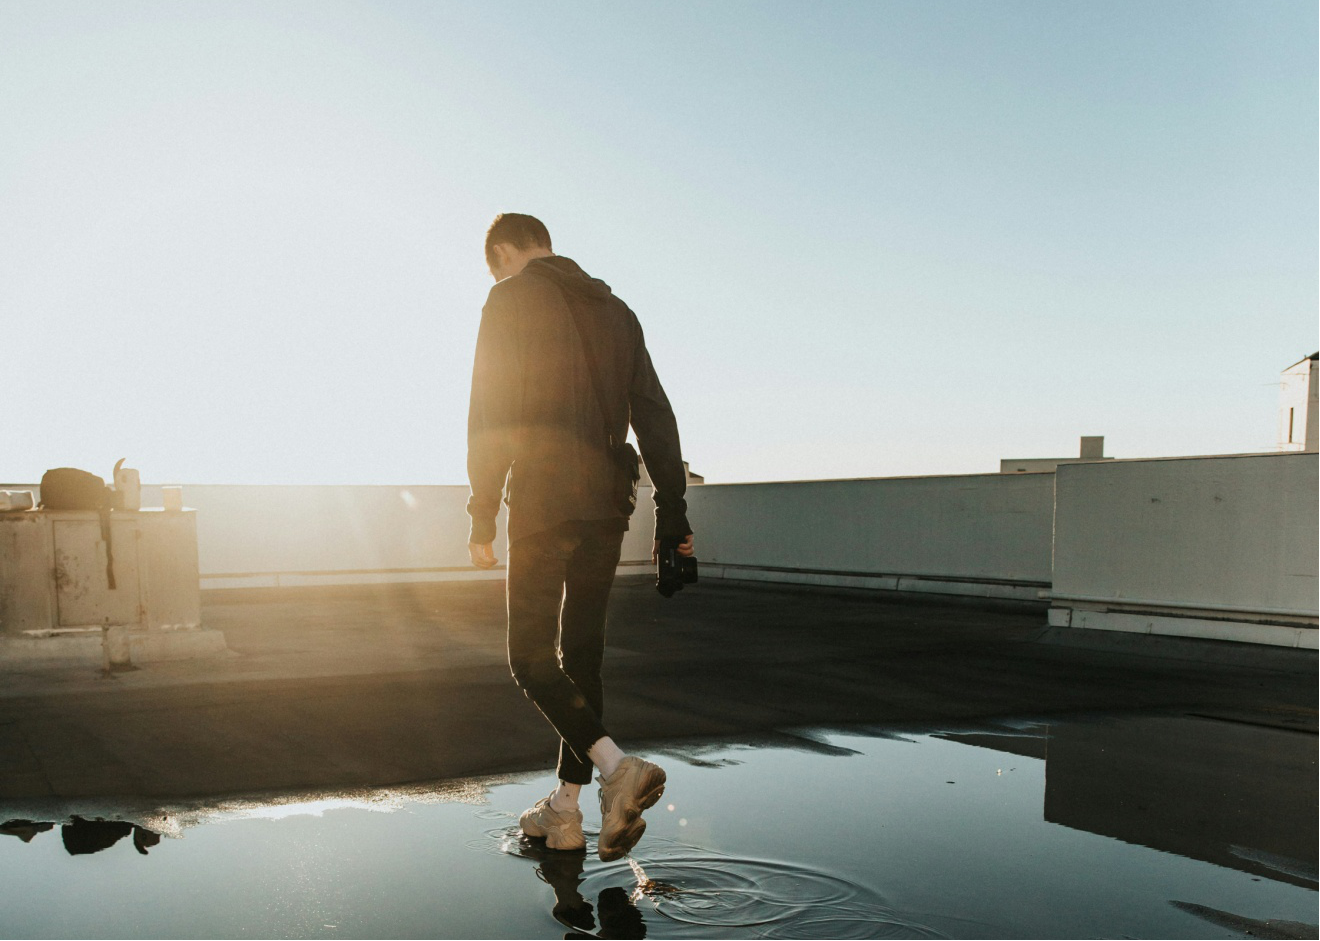 A man walking on a roof with a water puddle beneath his feet